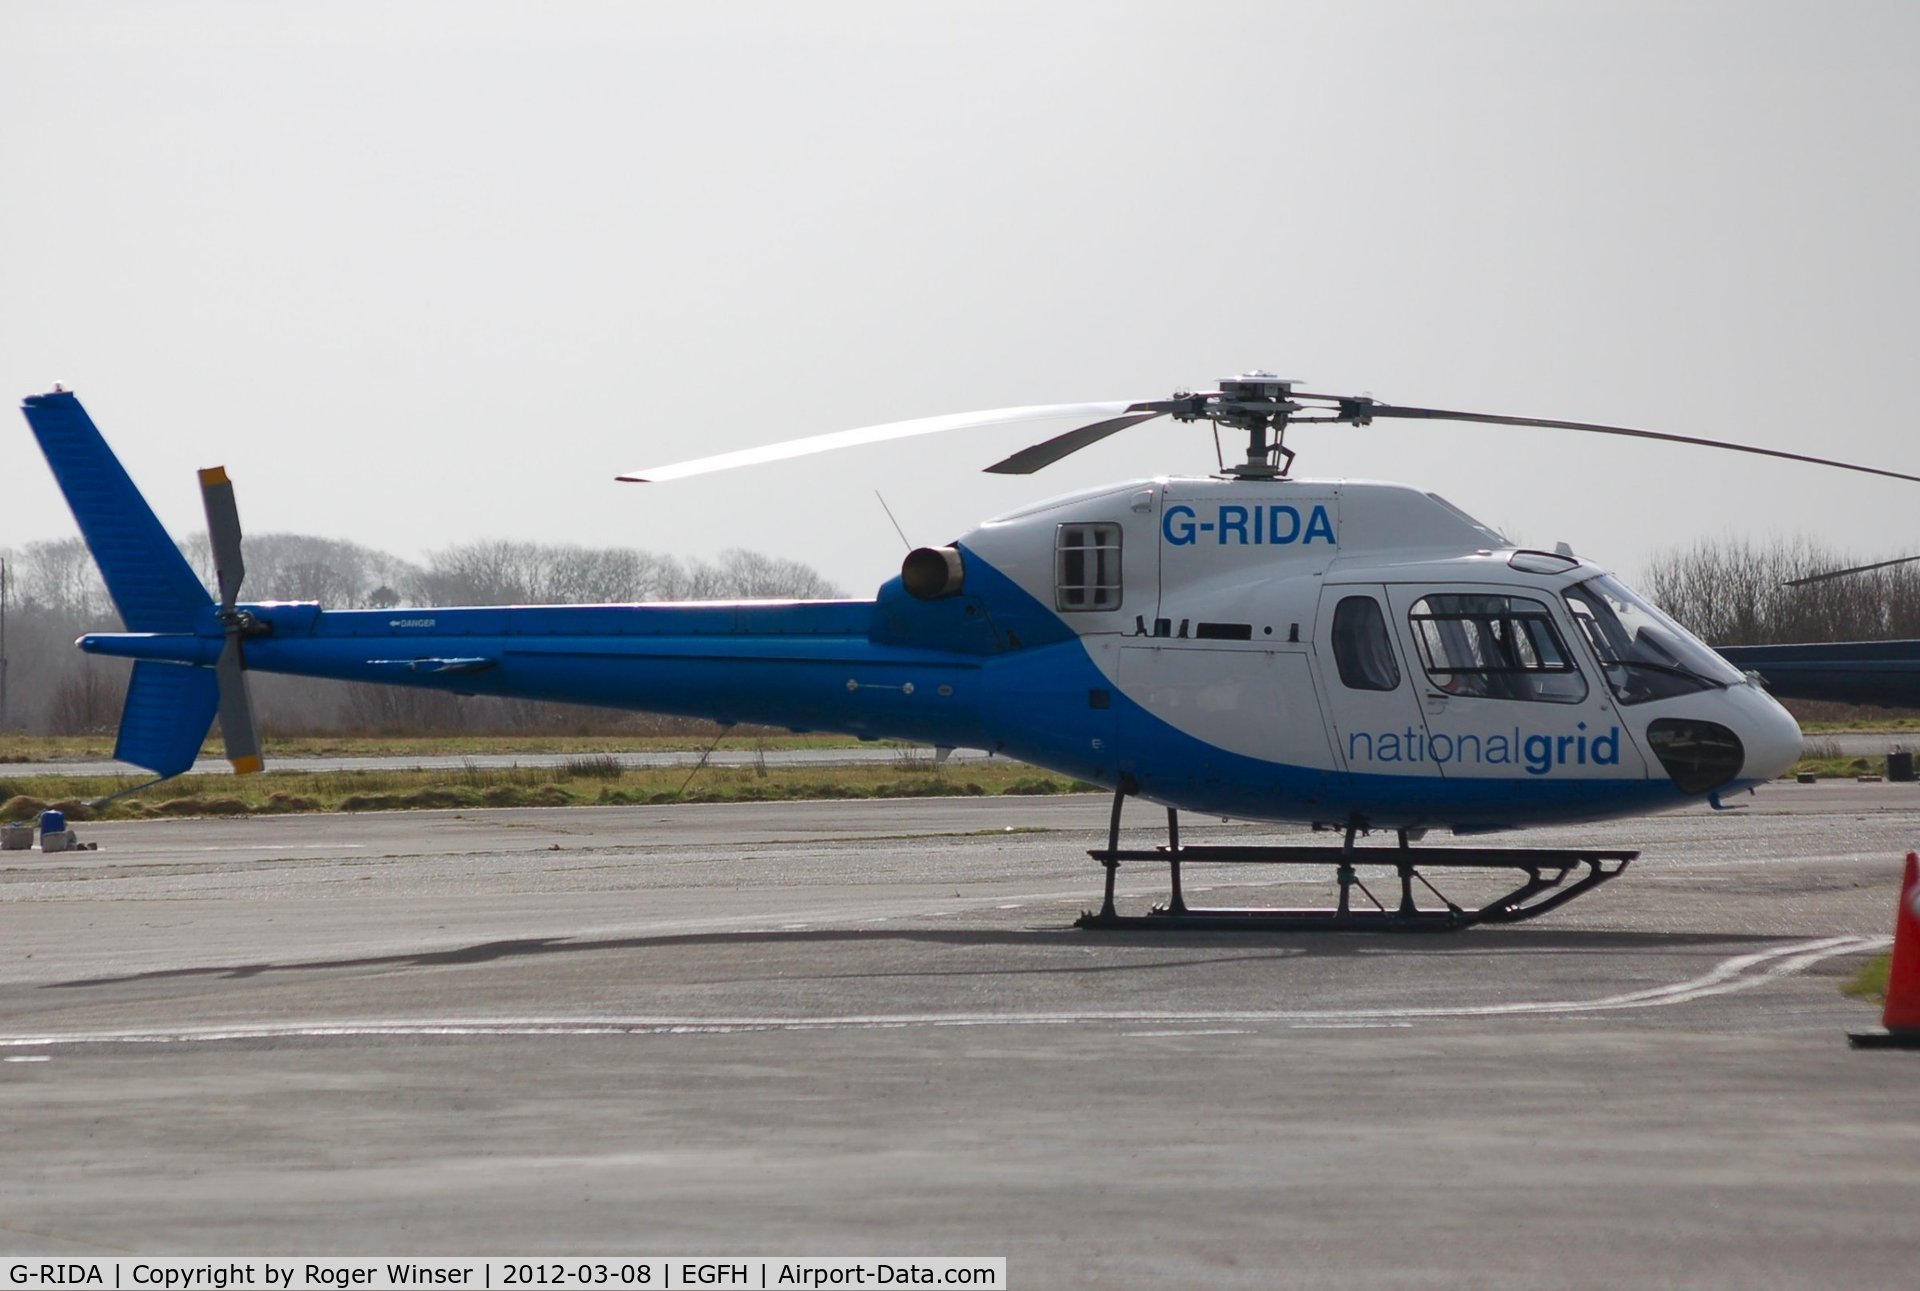 G-RIDA, 2007 Eurocopter AS-355NP Ecureuil 2 C/N 5734, Helicopter operated by National Grid Electricity Transmissions.